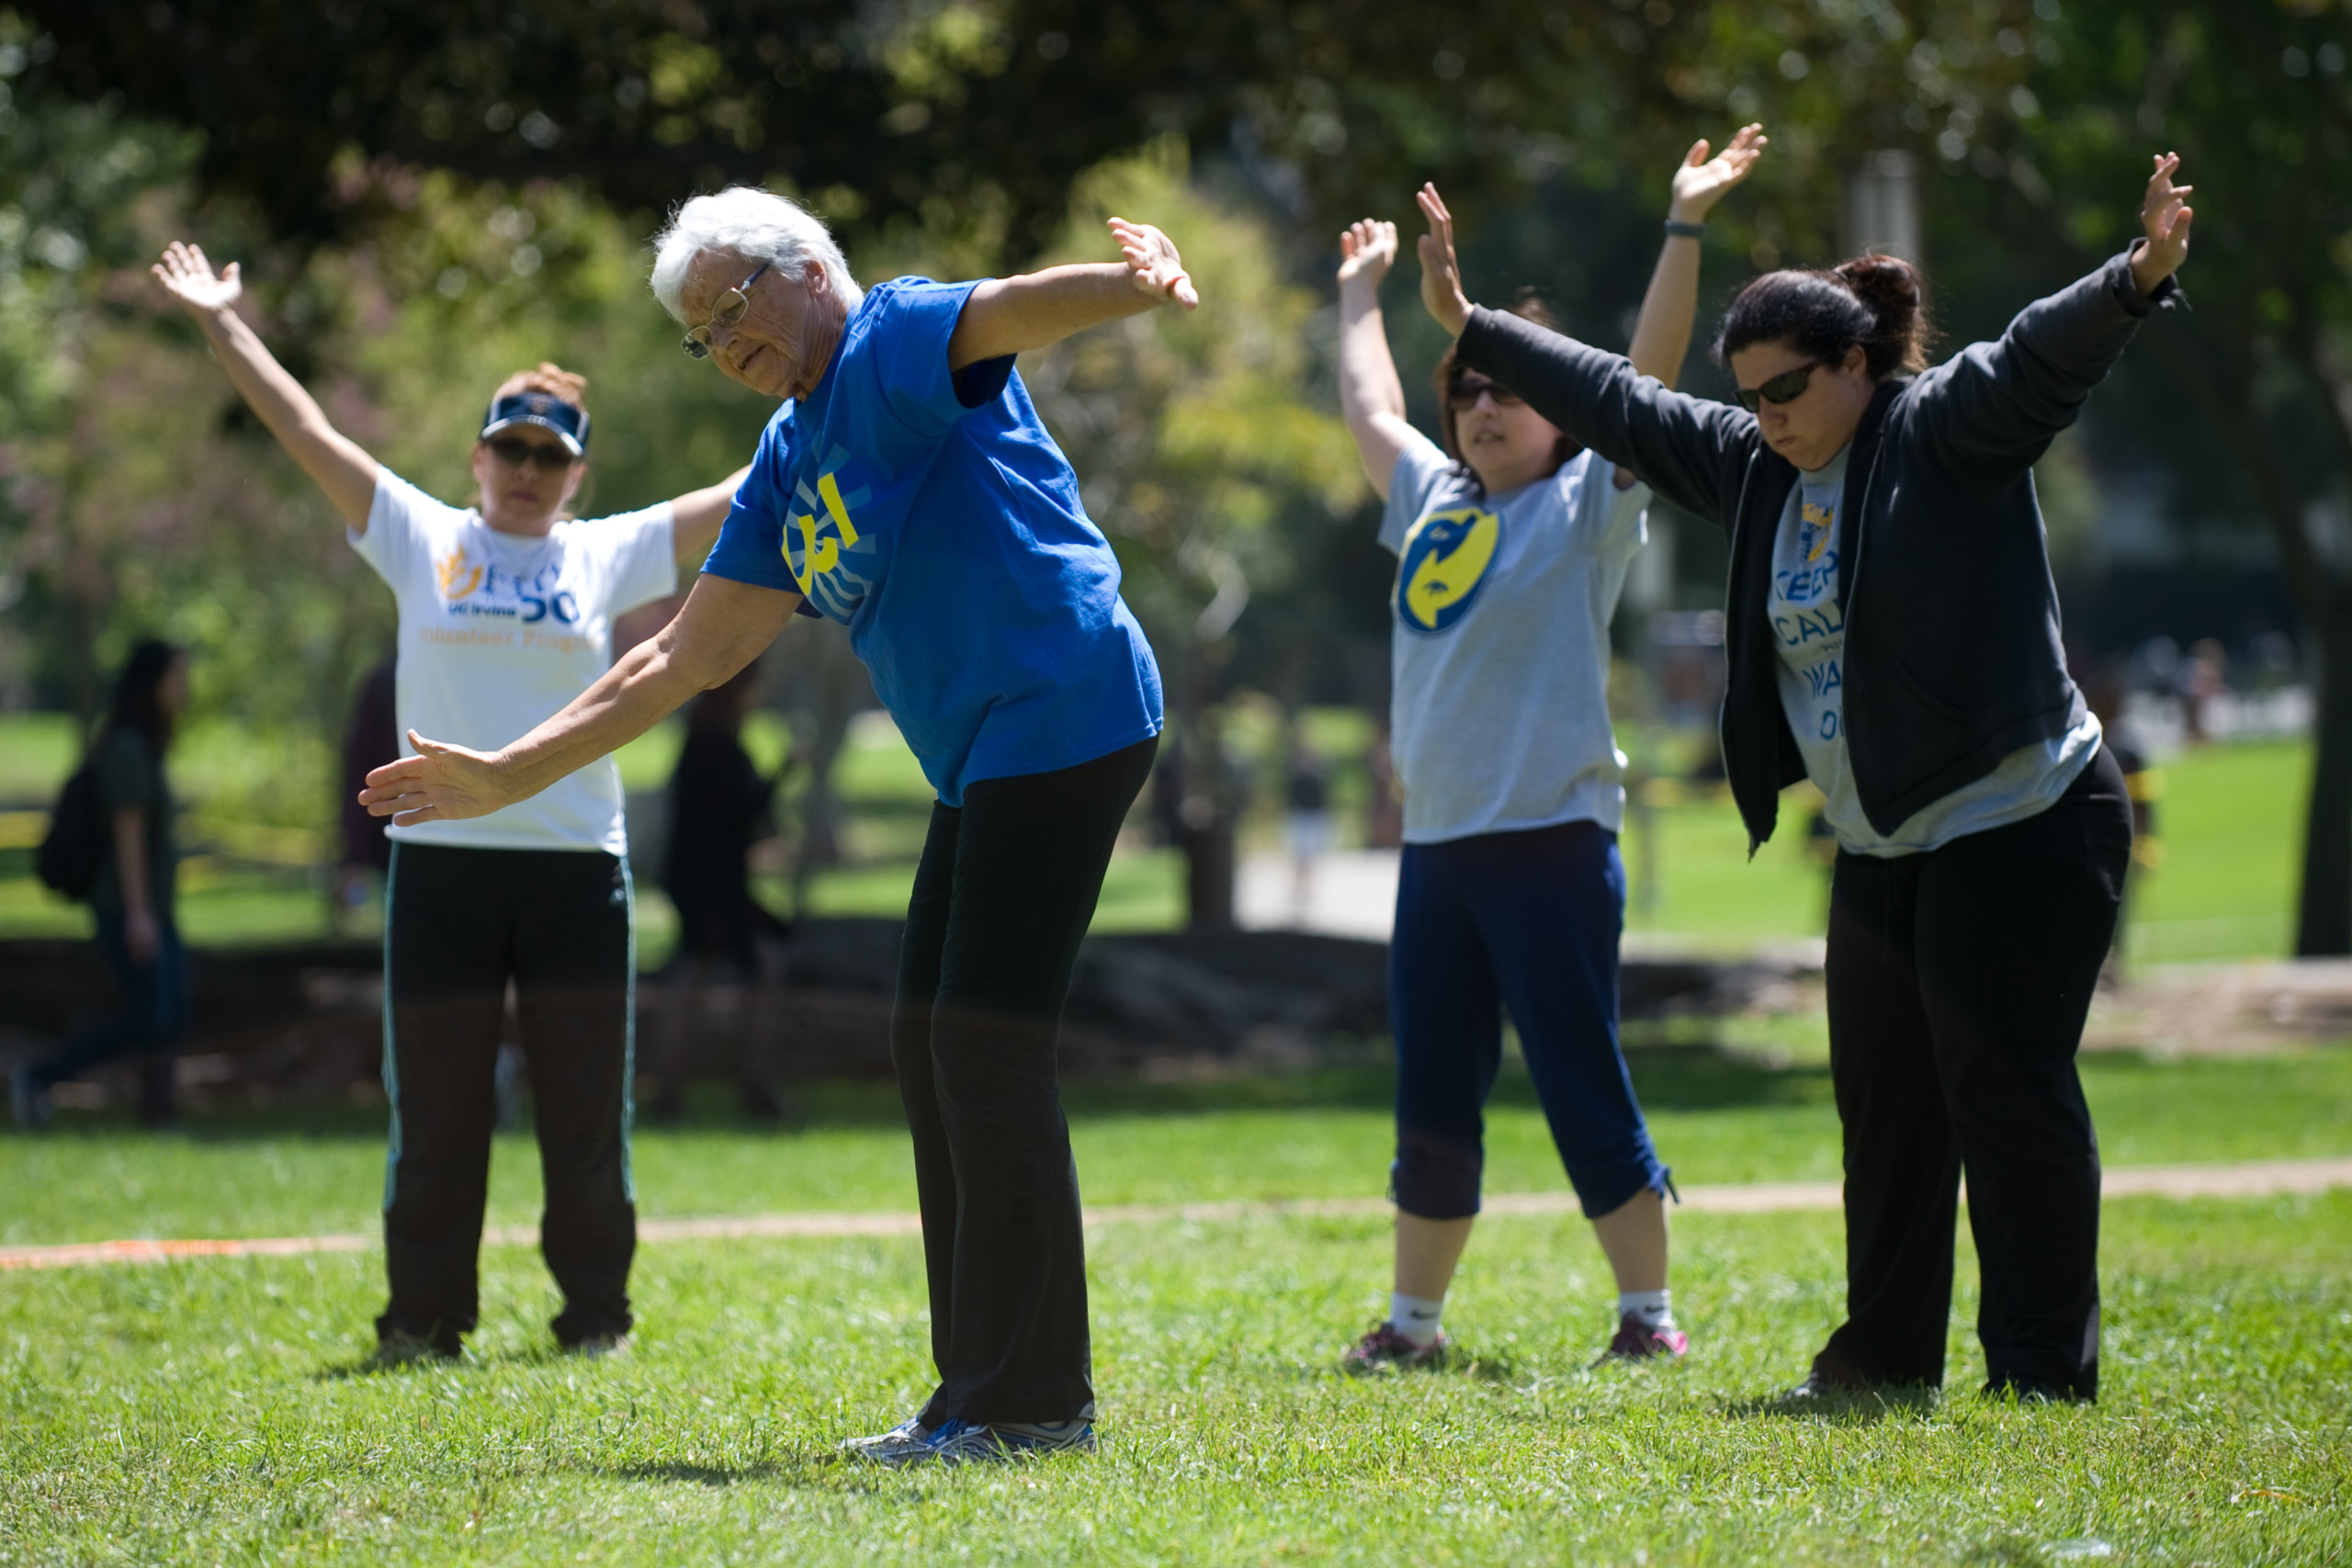 Olga Connolly leads a workout class in Aldrich Park. Now a staff member with UCI Campus Recreation, she achieved world fame in 1956 when she won an Olympic gold medal for Czechoslovakia and an American athletes heart.